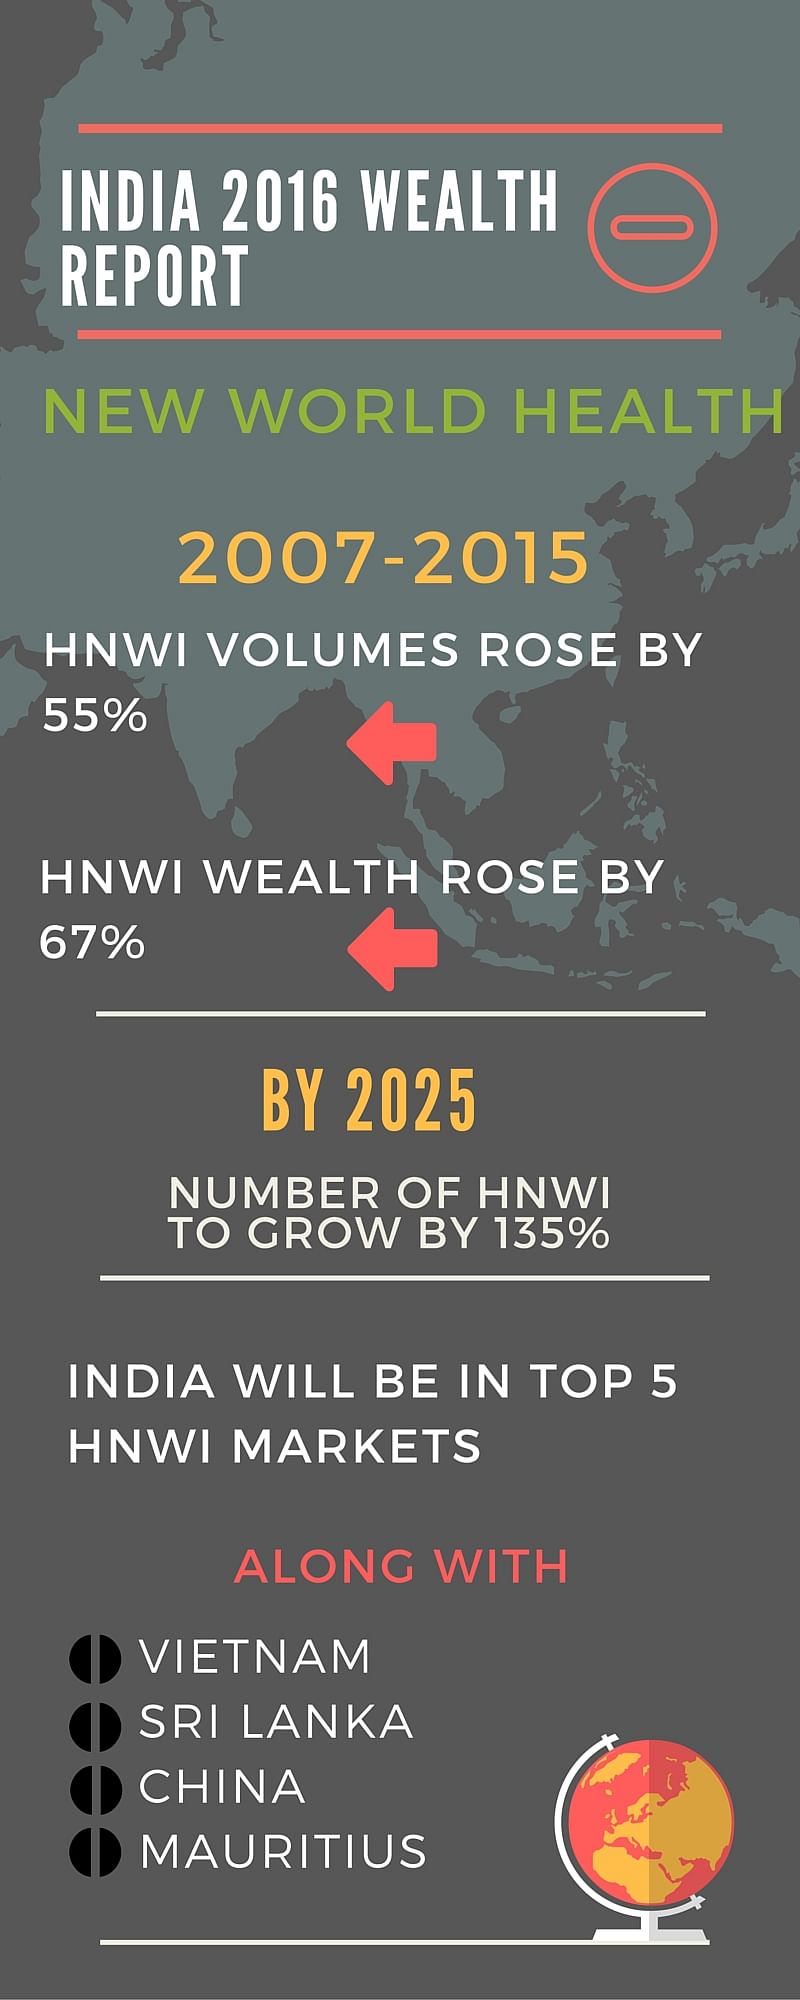 By 2025, India will be among top 5 performing ‘High Net Worth Individual’ markets in the world.